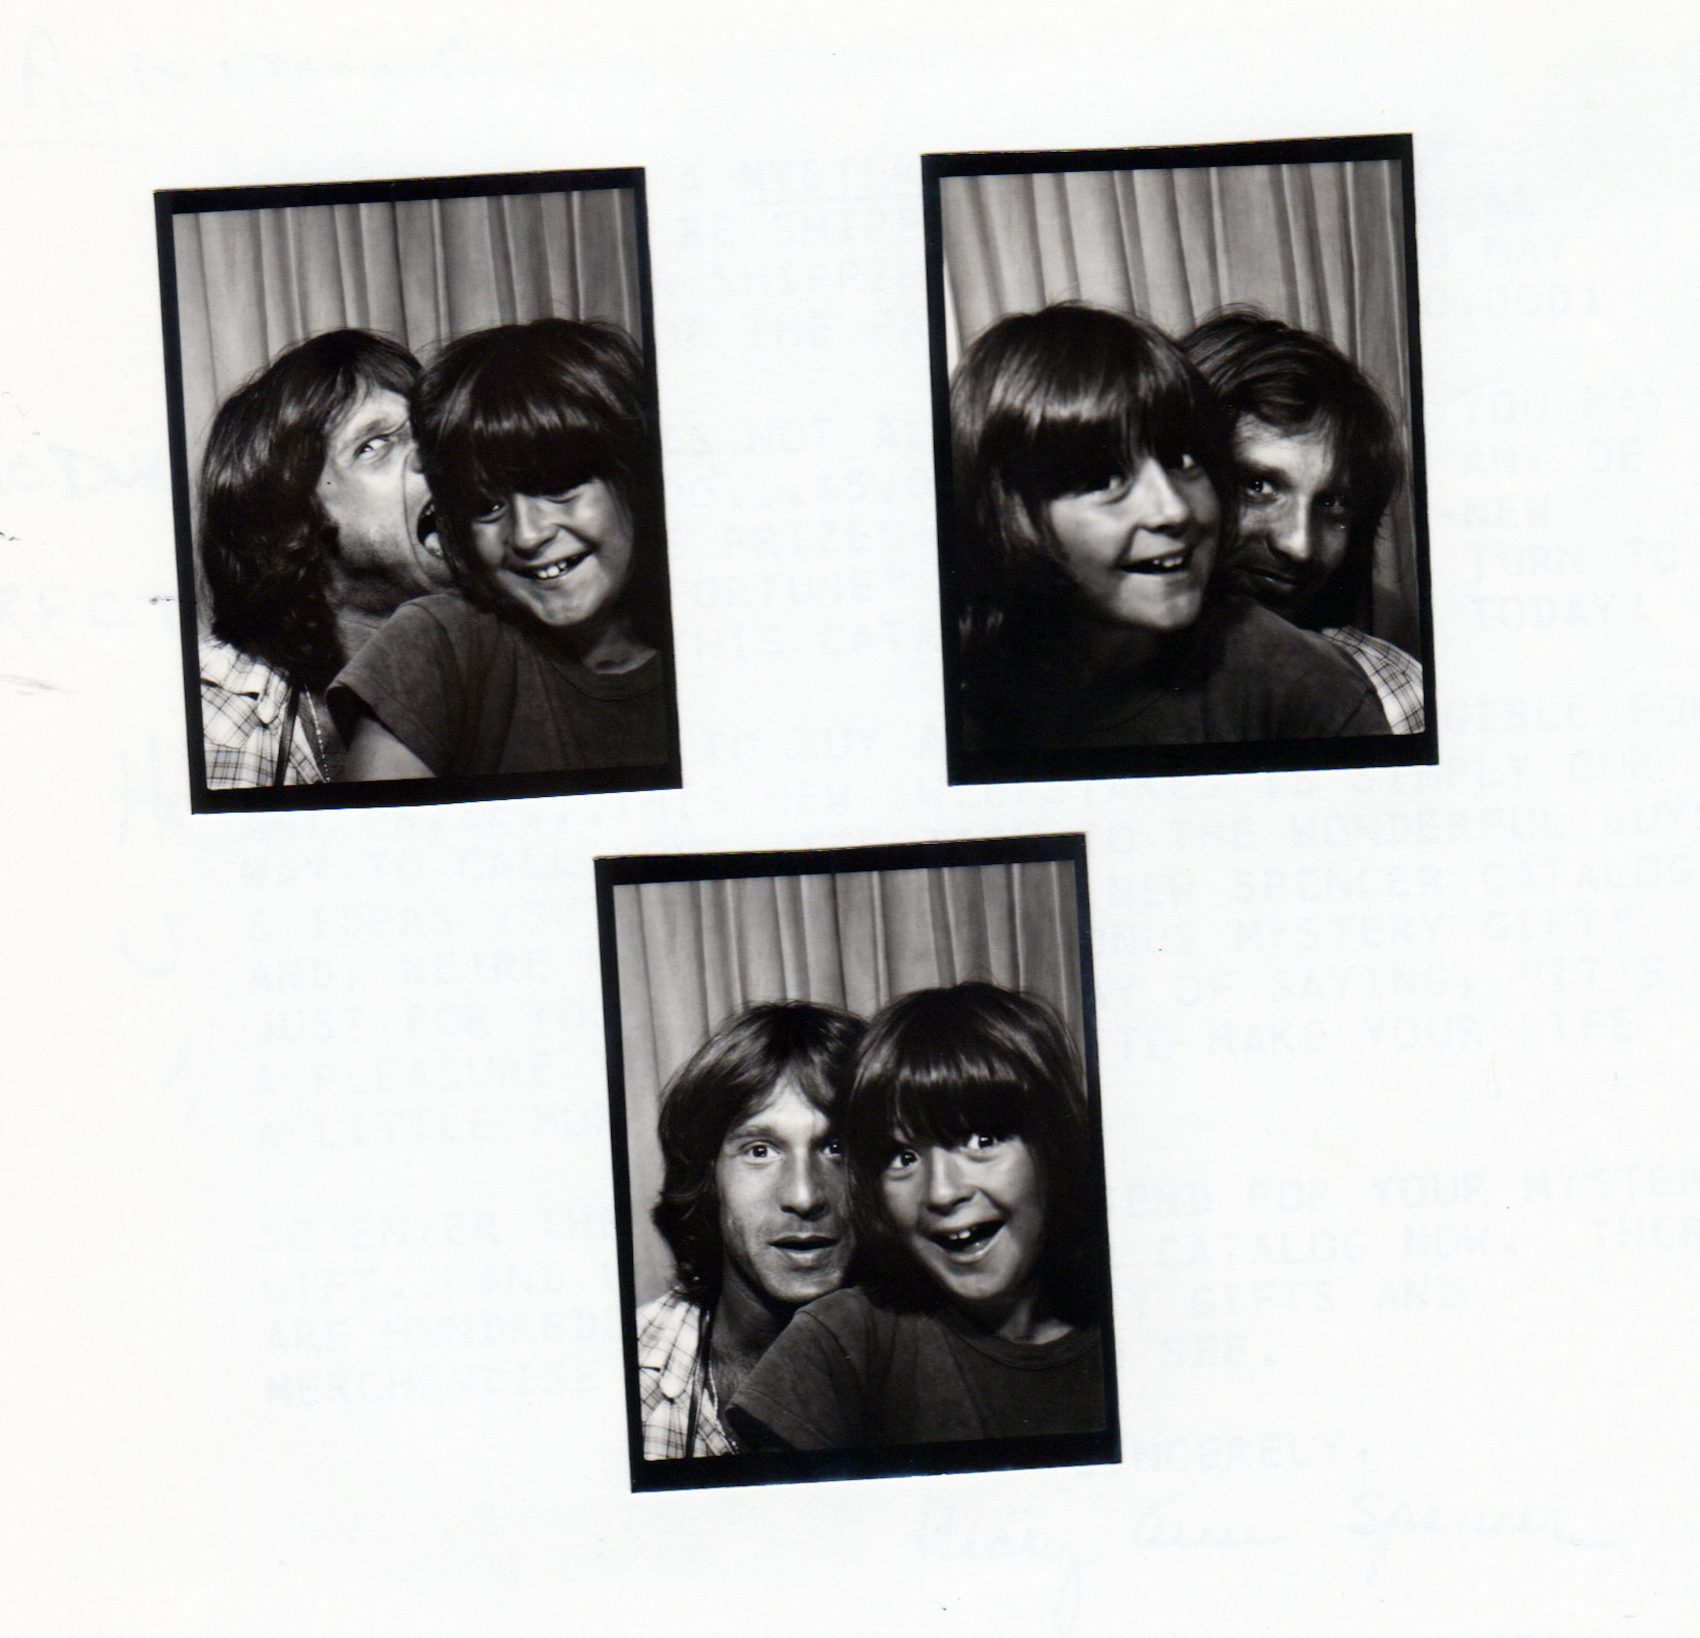 Lou Cove and Howie Gordon photobooth pictures from 1978. (Courtesy Lou Cove)